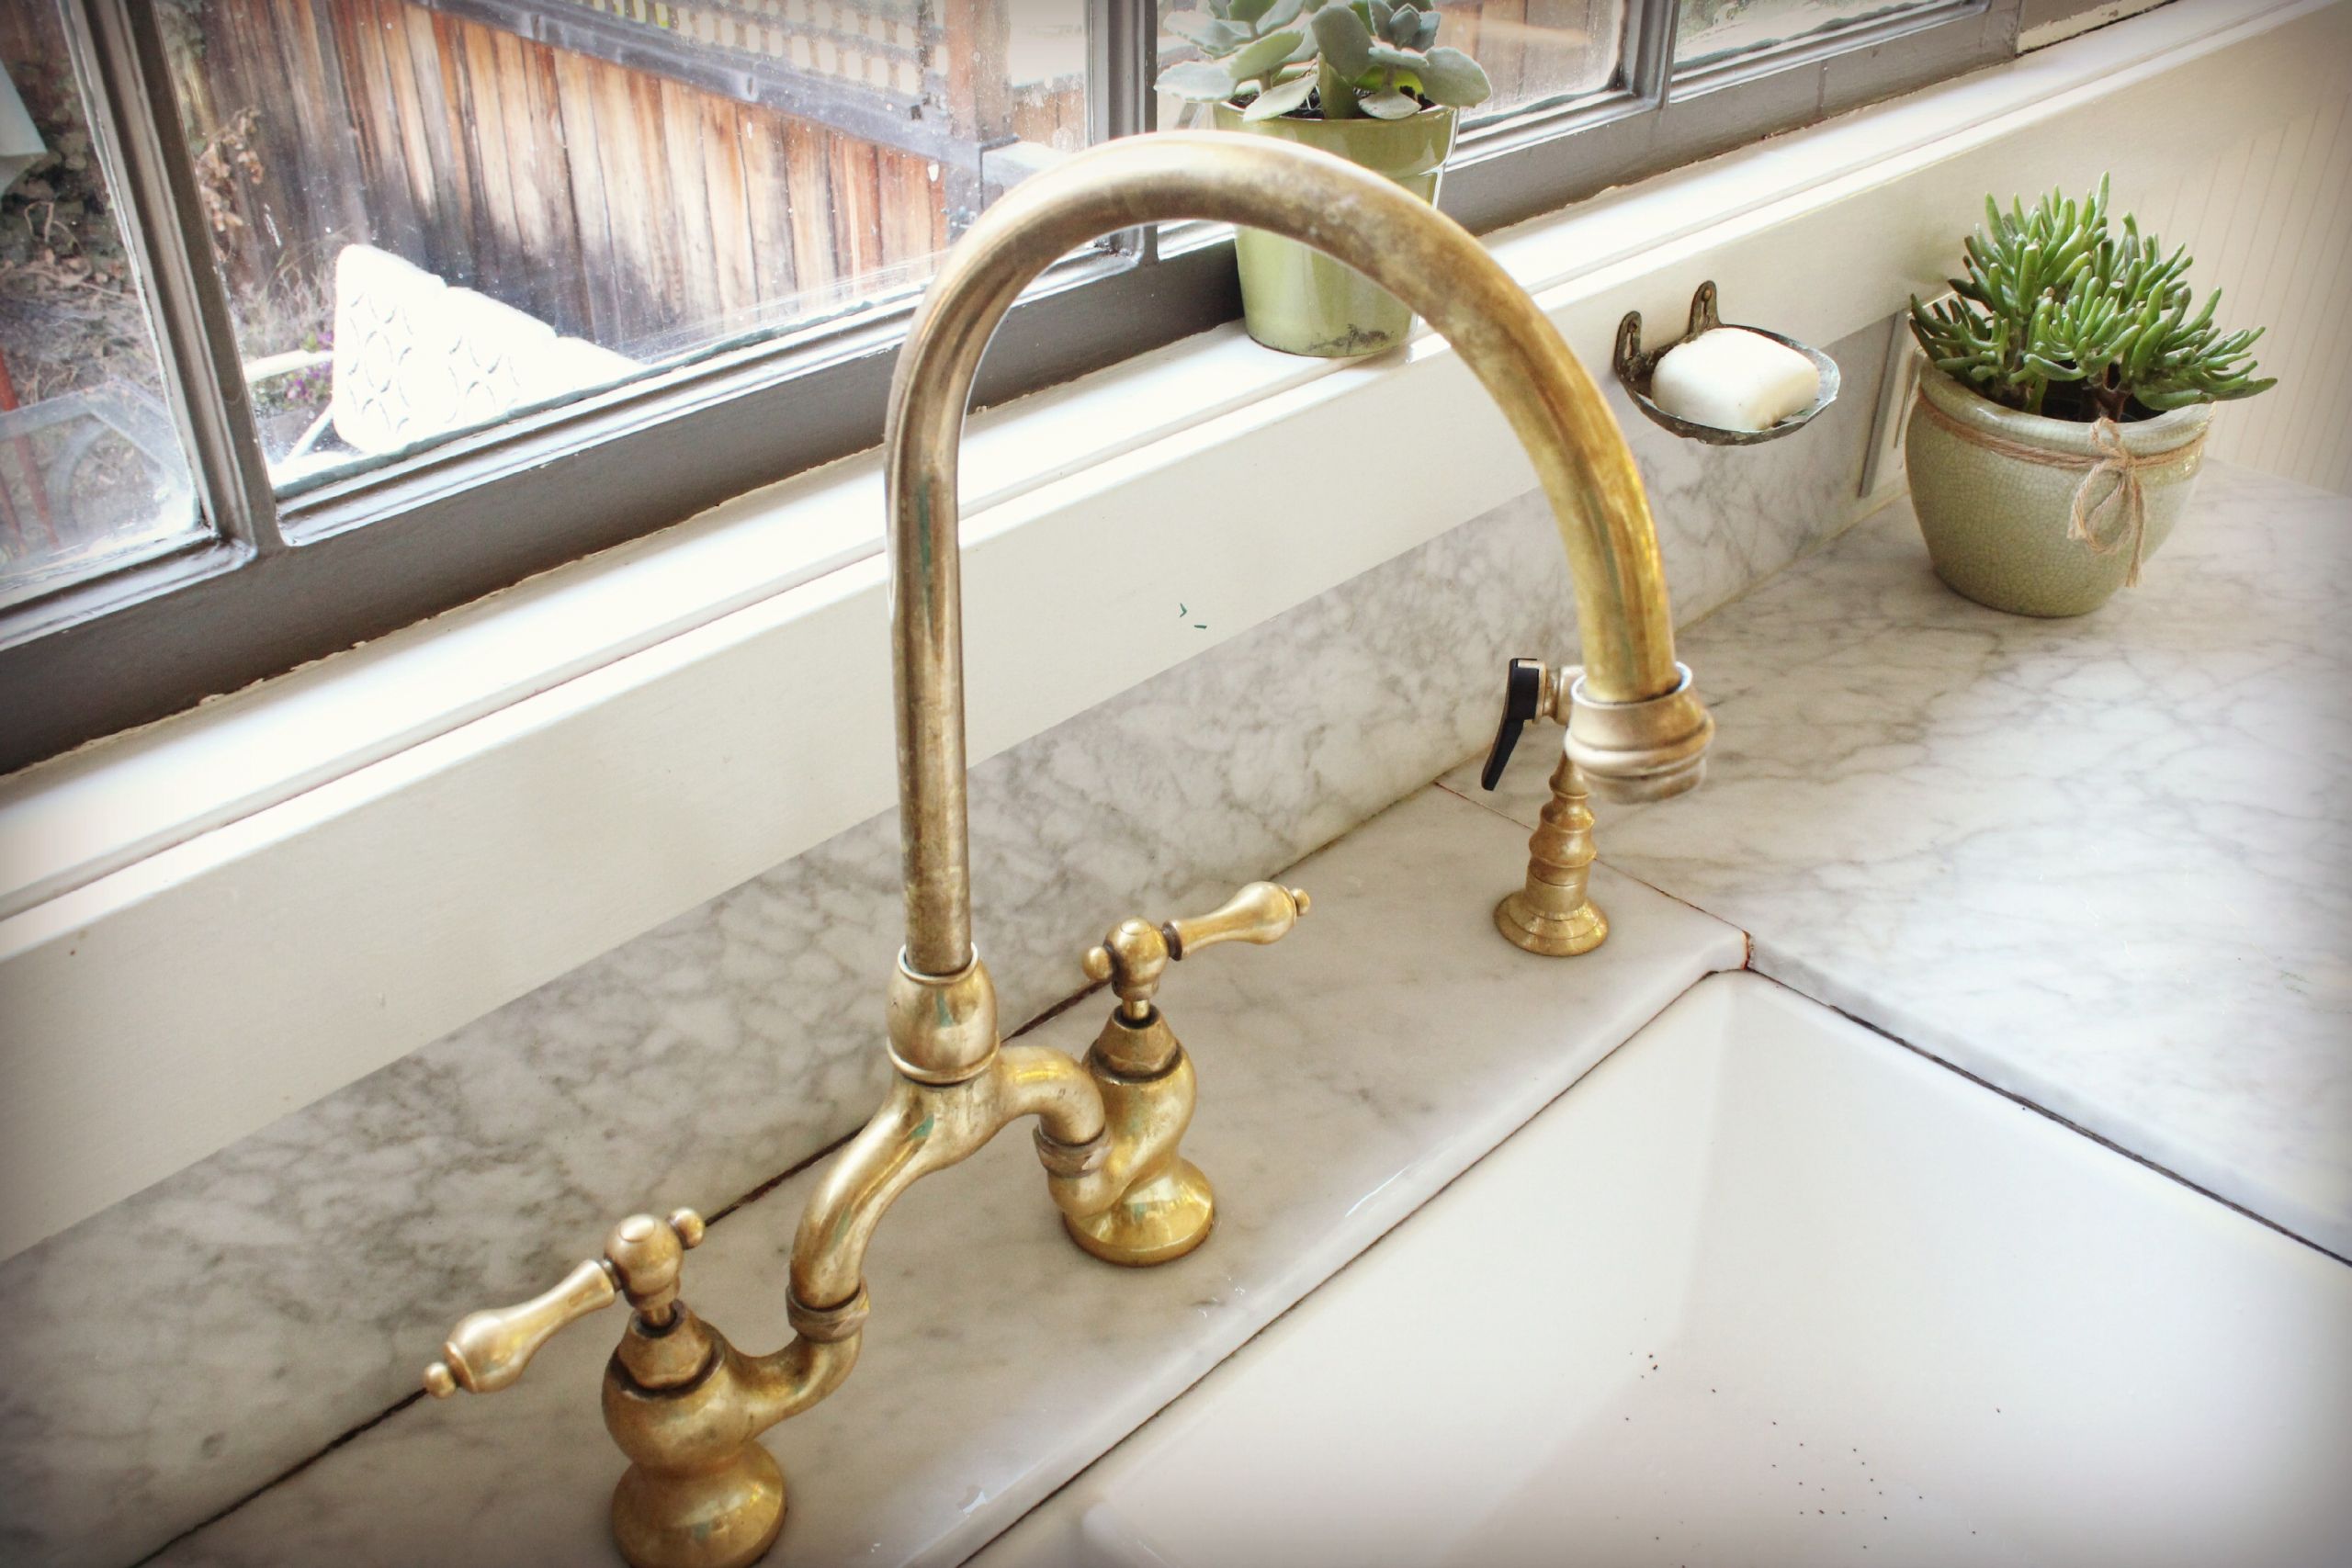 Delta Brass Bathroom Faucets Beautiful Antique Brass Faucet Delta Of Delta Brass Bathroom Faucets Scaled 